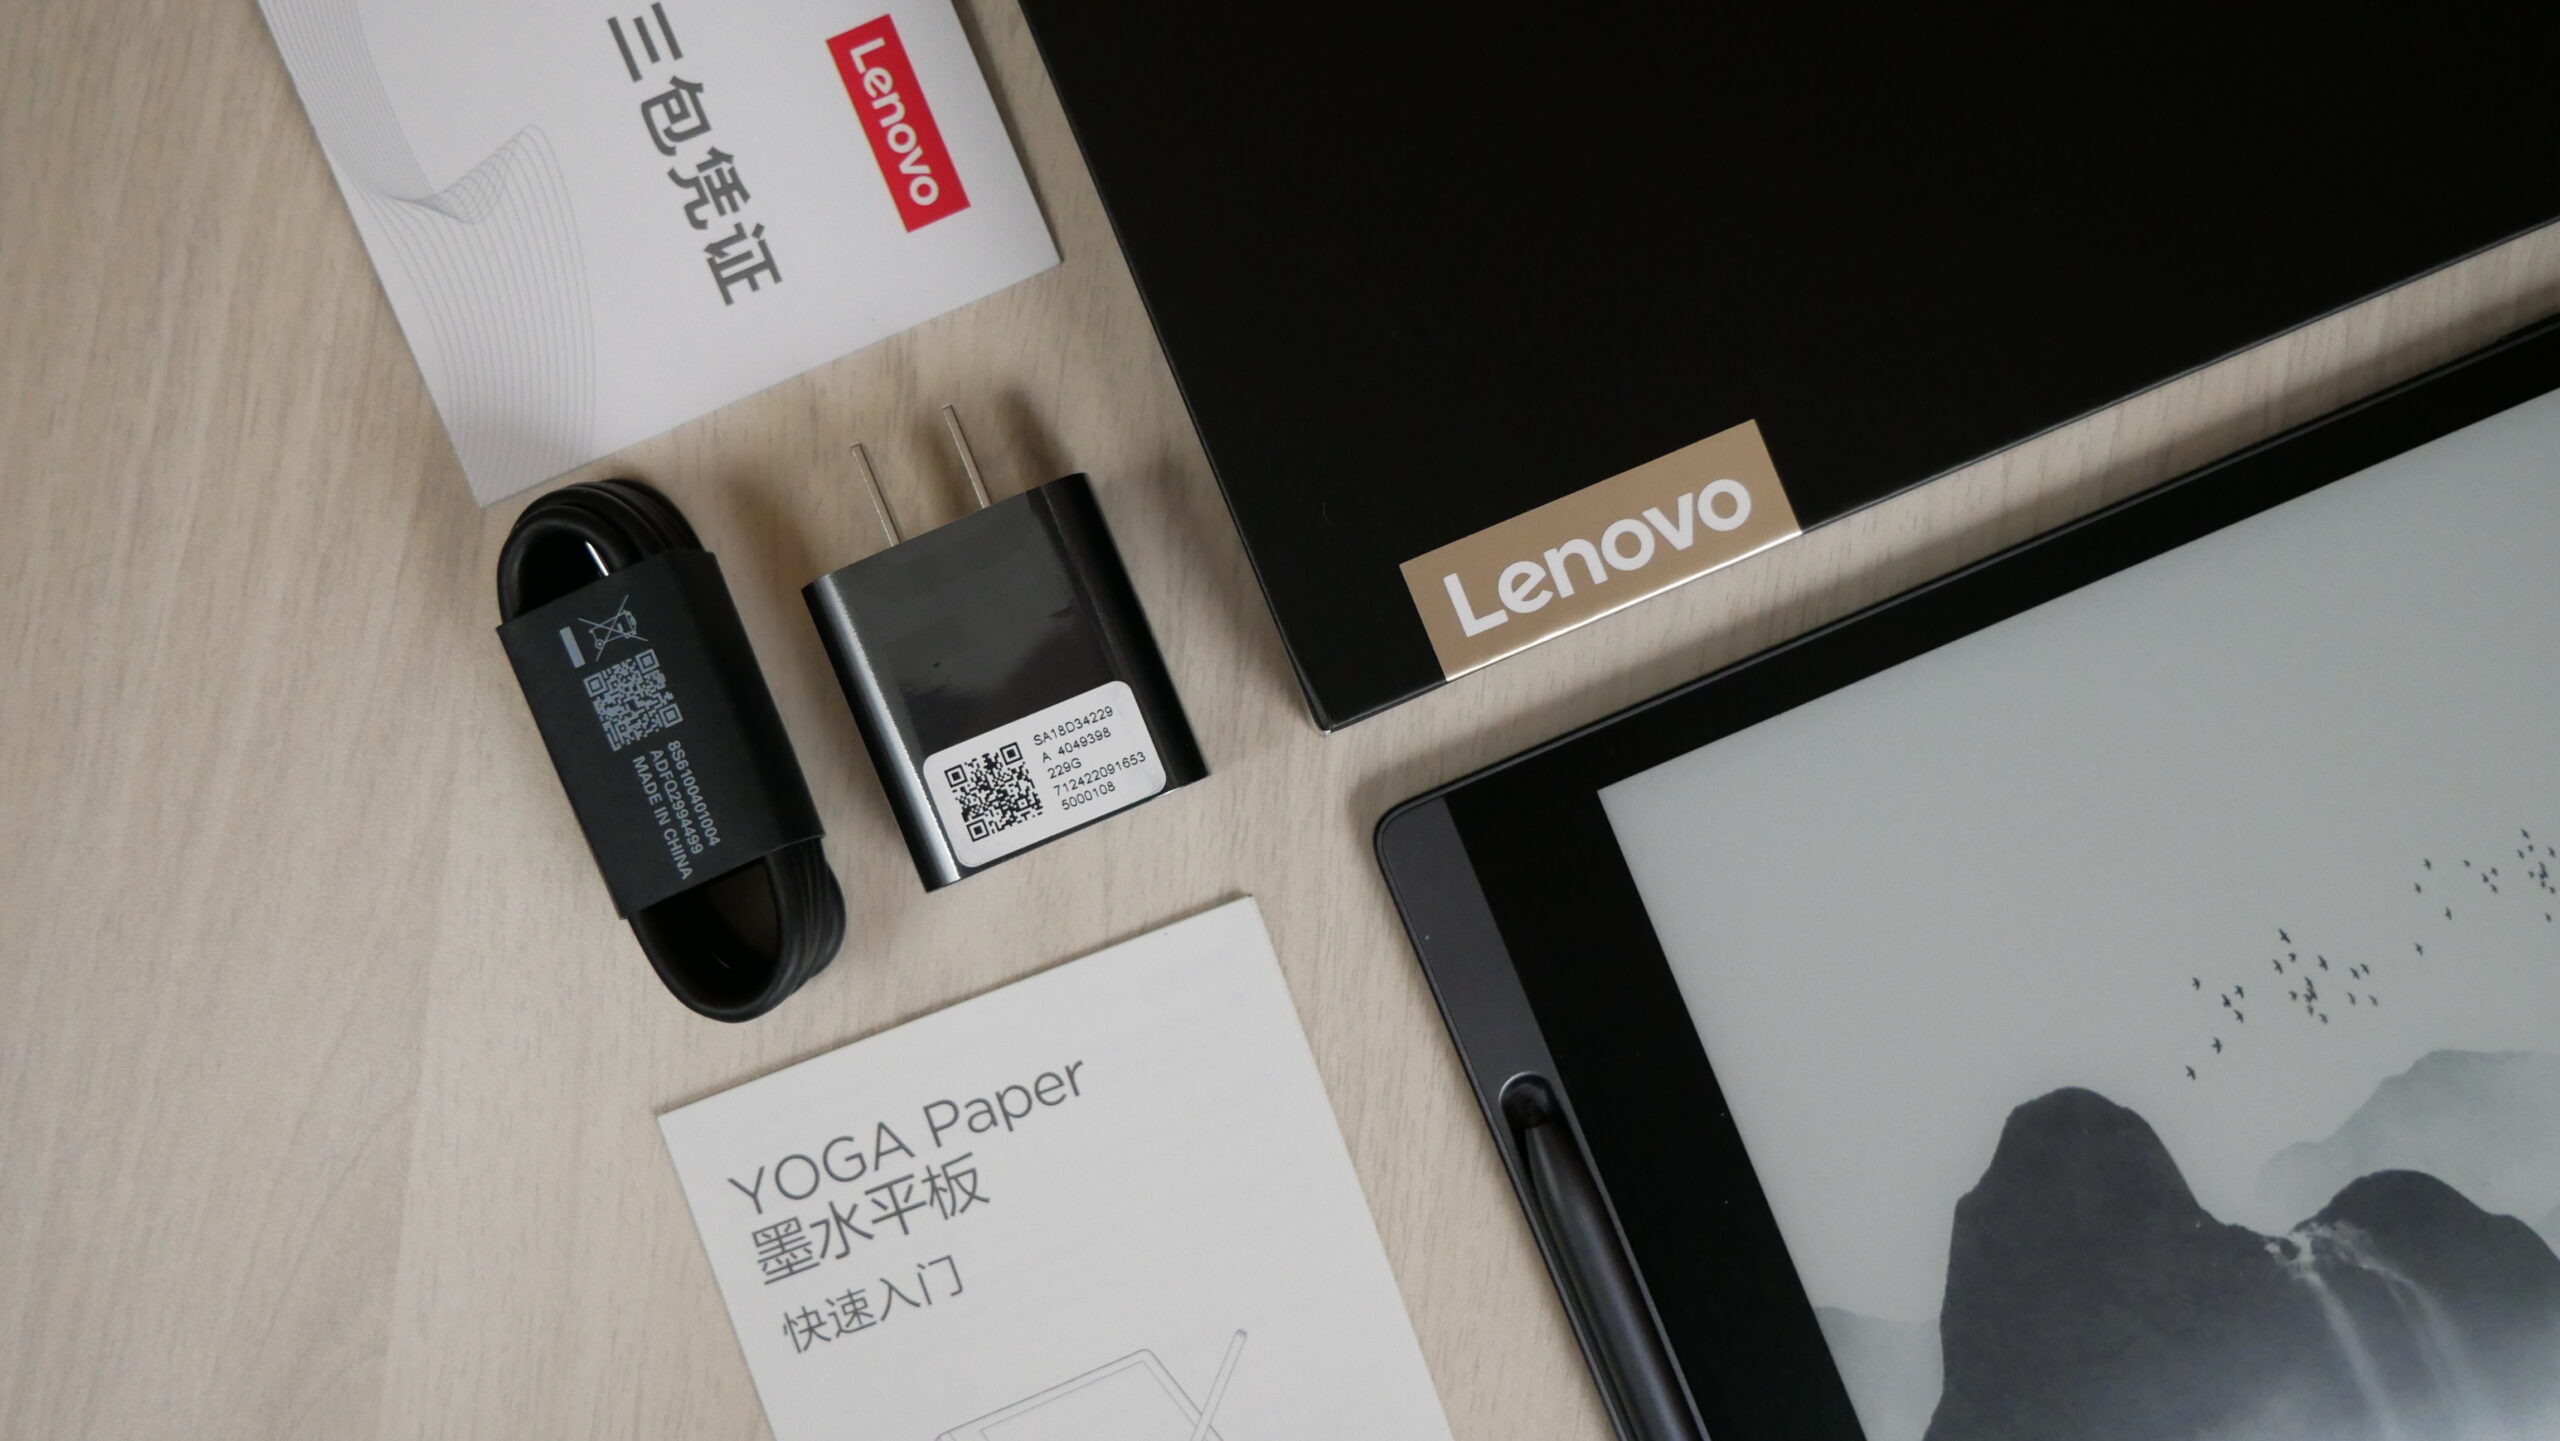 Please DON'T Buy the Lenovo Smart Paper Before Watching This! 